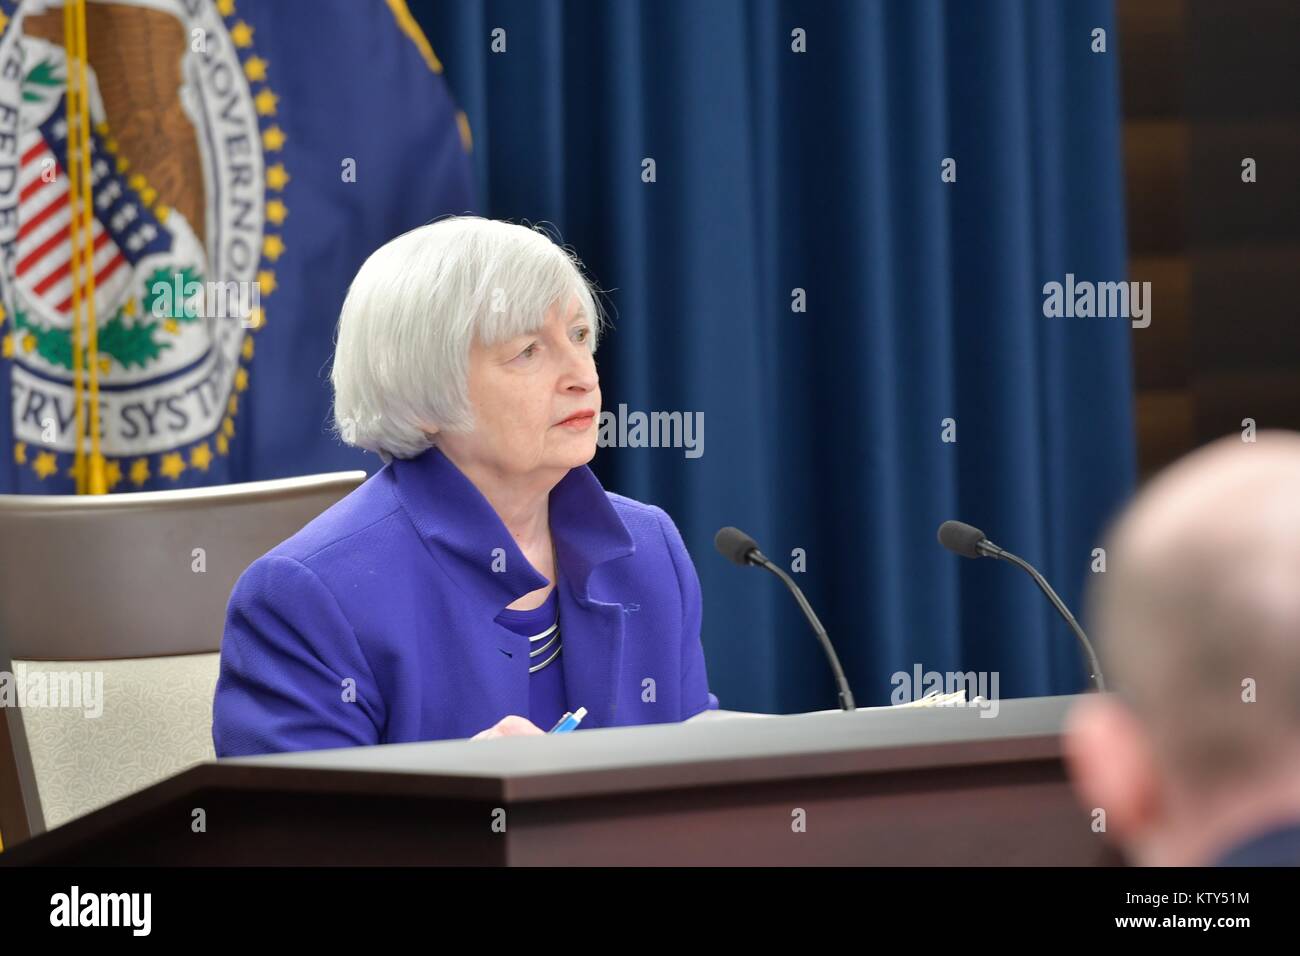 U S Federal Reserve System Board Of Governors Chair Janet Yellen